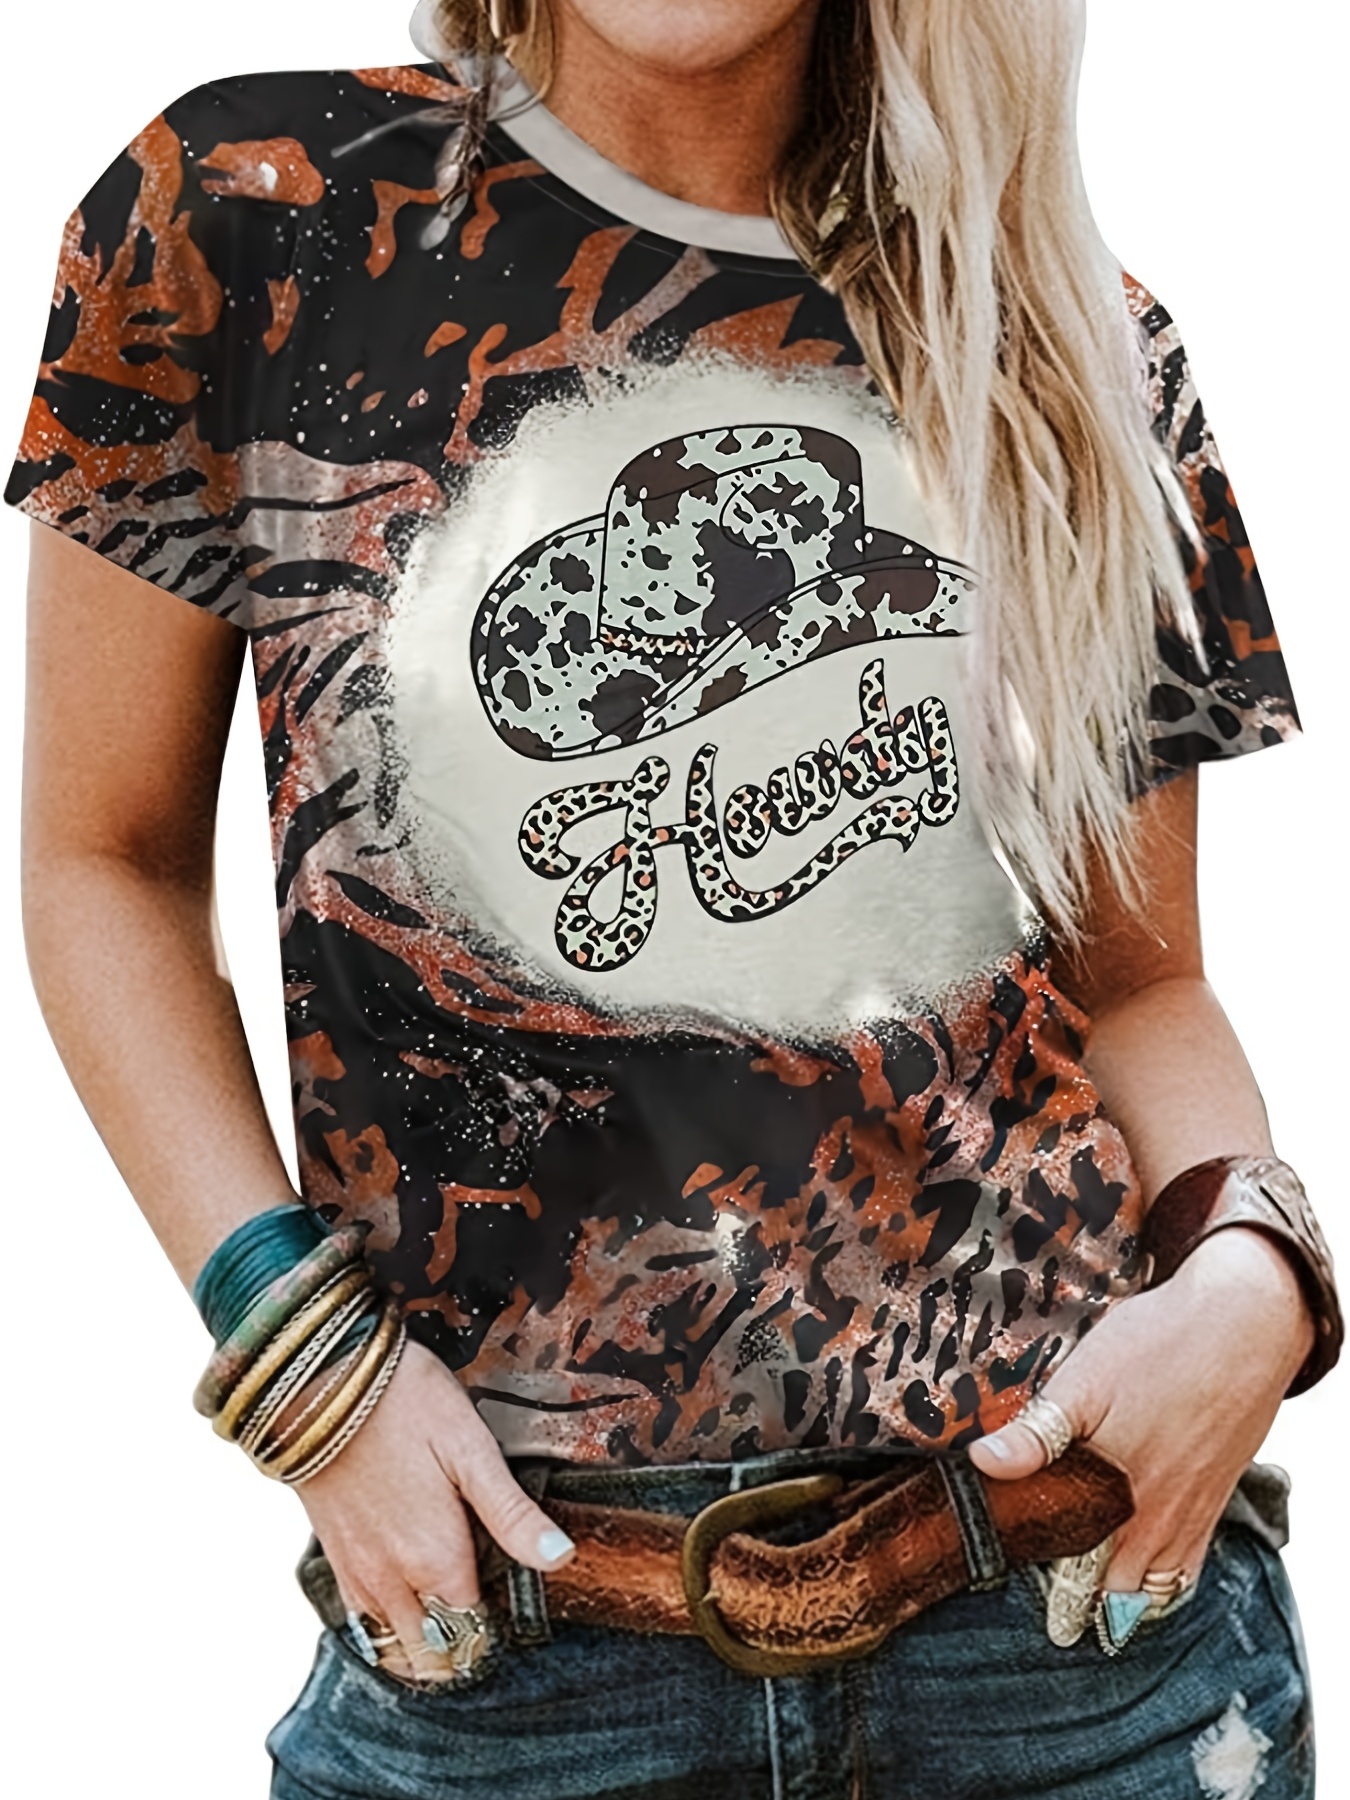 Leopard Graphic & Letter Print Crew Neck T-shirt, Vintage Western Country  Music Graphic Loose Short Sleeve Summer T-Shirts Tops, Women's Clothing